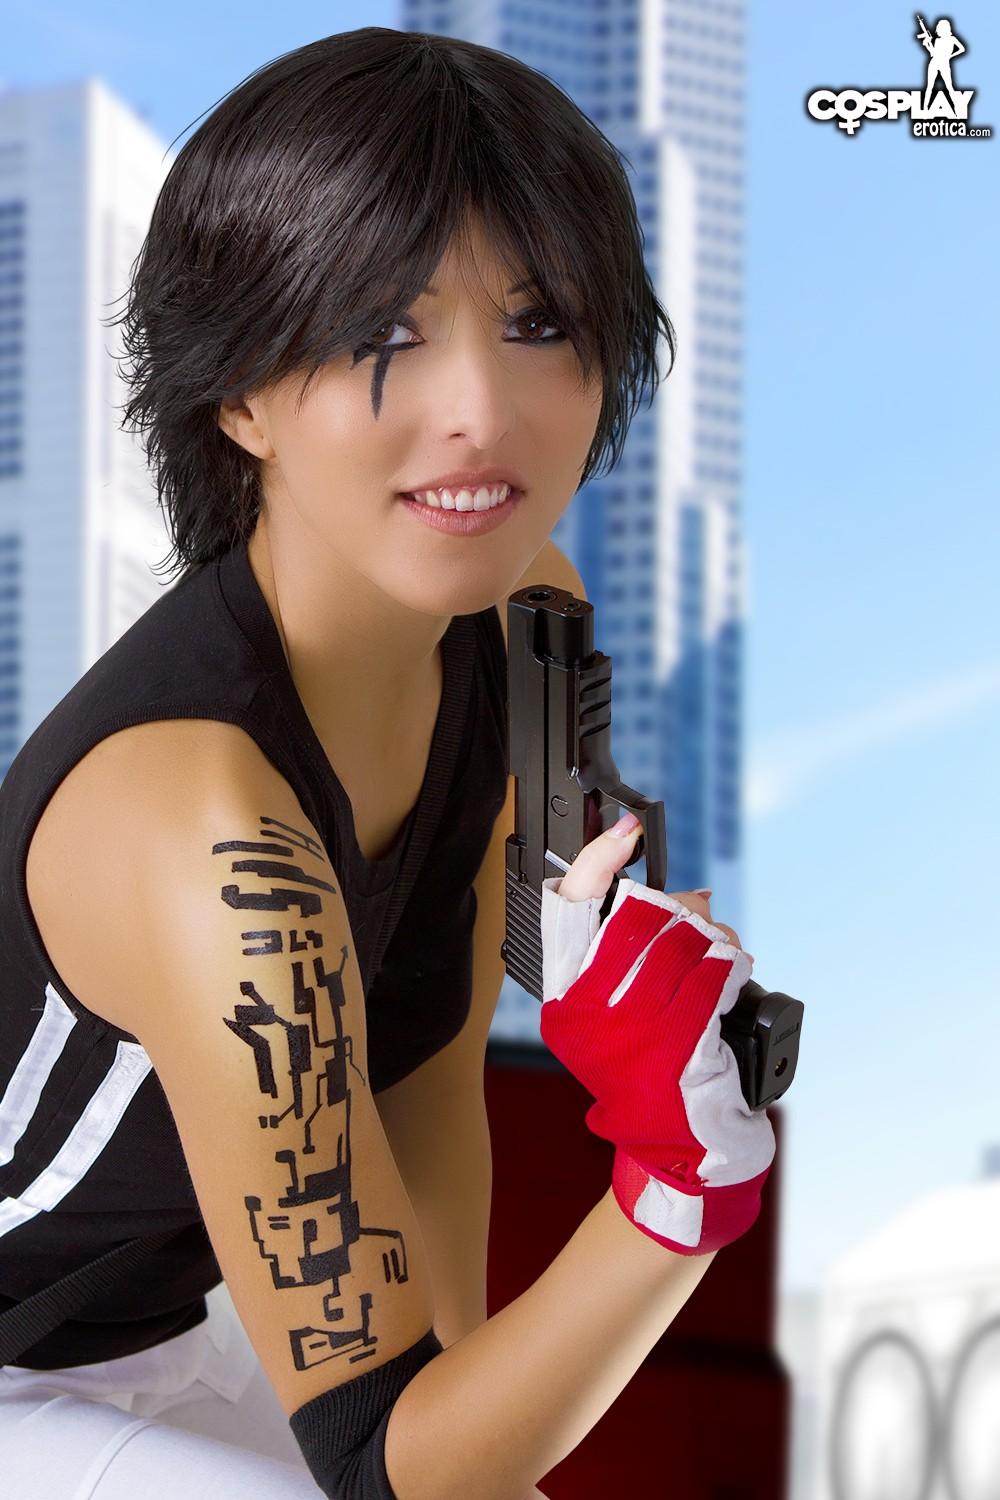 Sexy cosplay girl Anne poses as Faith from Mirror's Edge #53248435